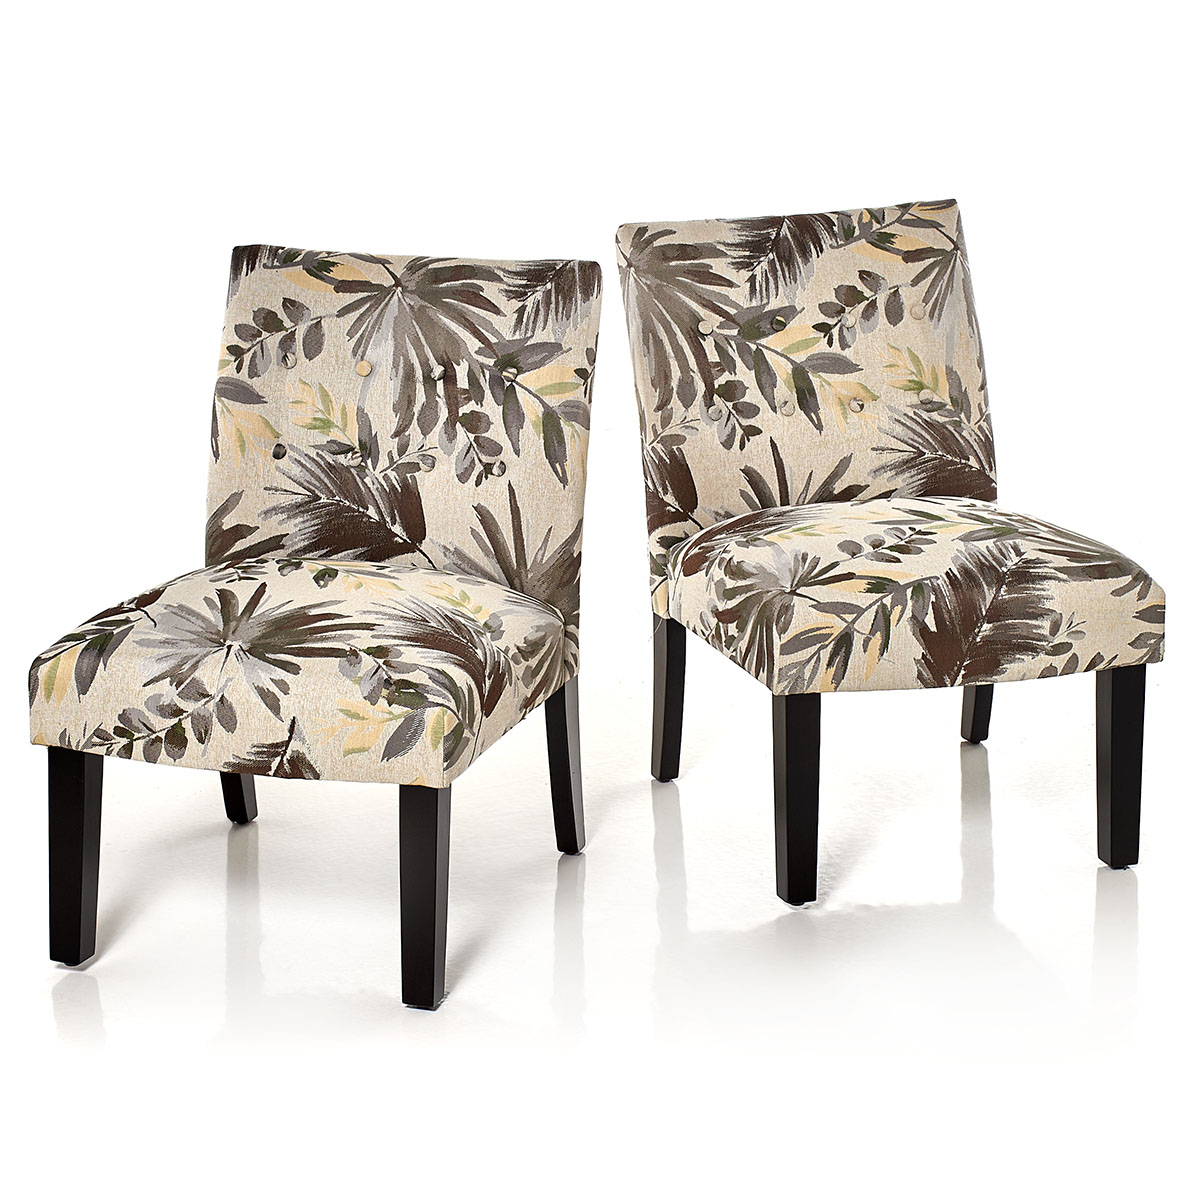 Emerald Home Furnishings Cayman Accent Chairs - Set Of 2